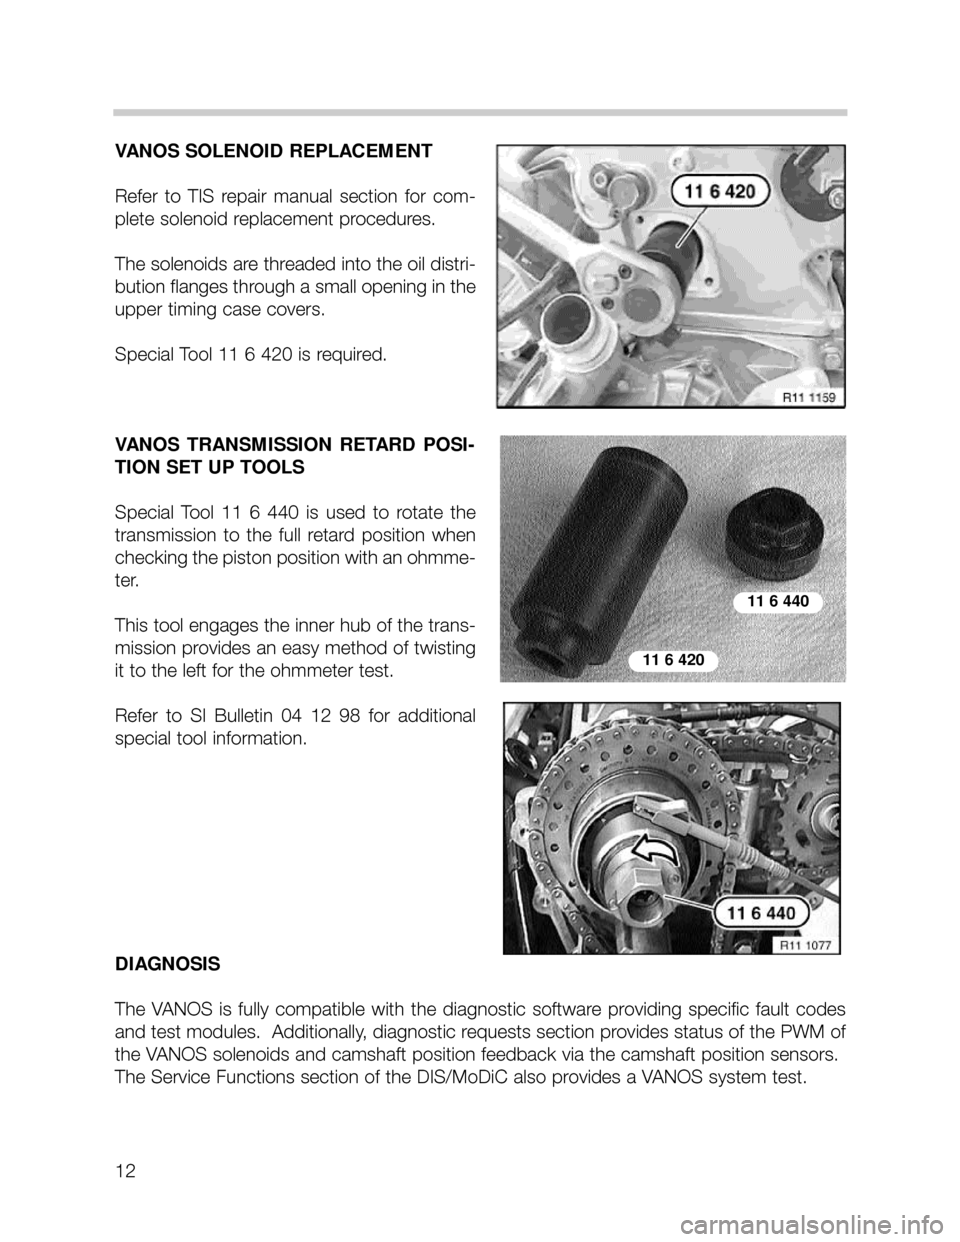 BMW X5 2006 E53 M62TU Engine User Guide 12
VANOS SOLENOID REPLACEMENT
Refer  to  TIS  repair  manual  section  for  com-
plete solenoid replacement procedures.  
The solenoids are threaded into the oil distri-
bution flanges through a small